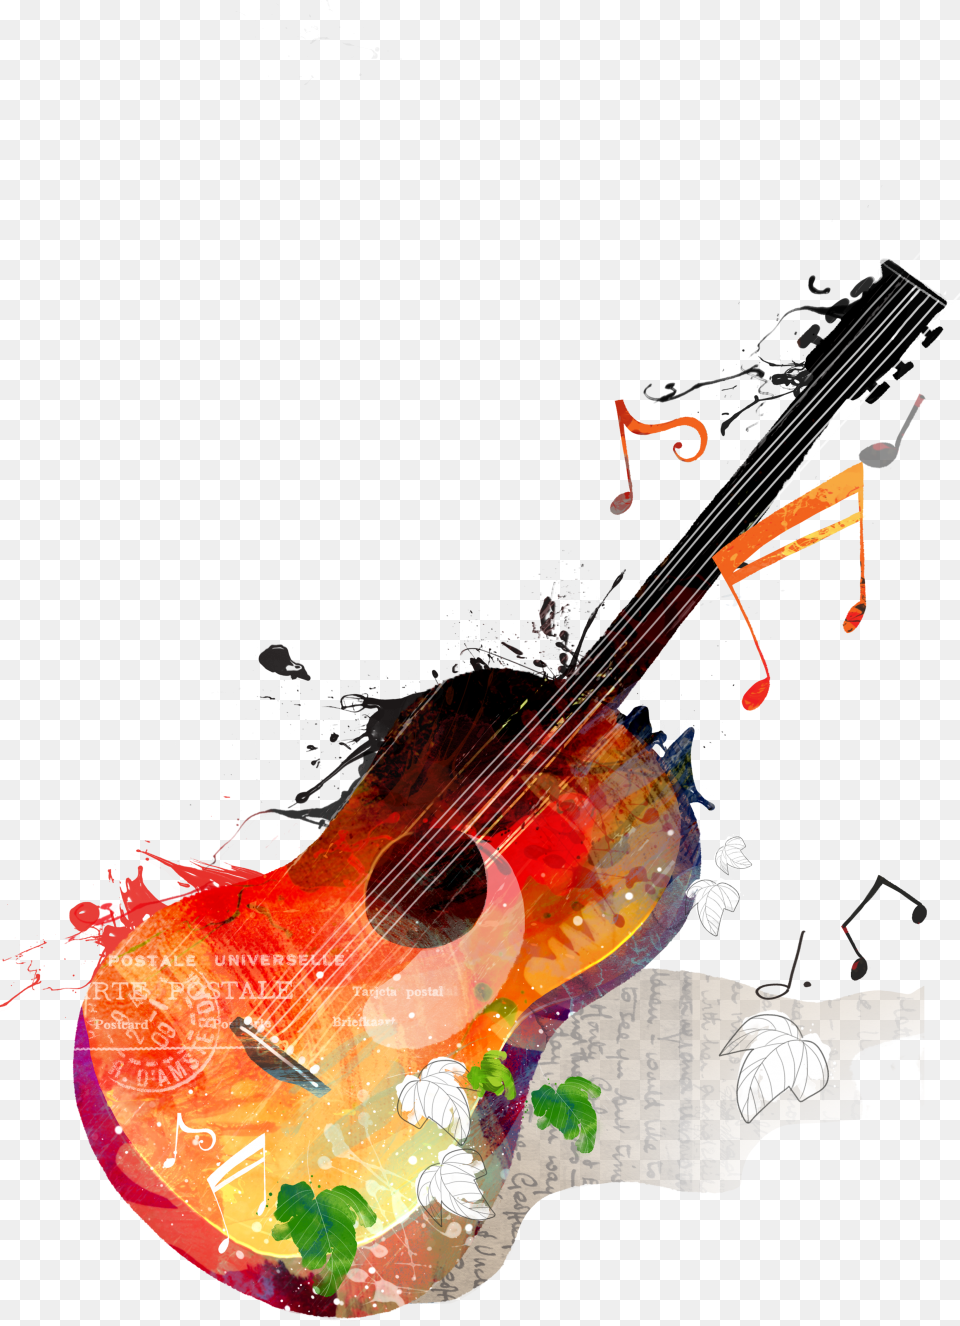 Cello Musical Instrument Music Instrument, Musical Instrument, Guitar Png Image